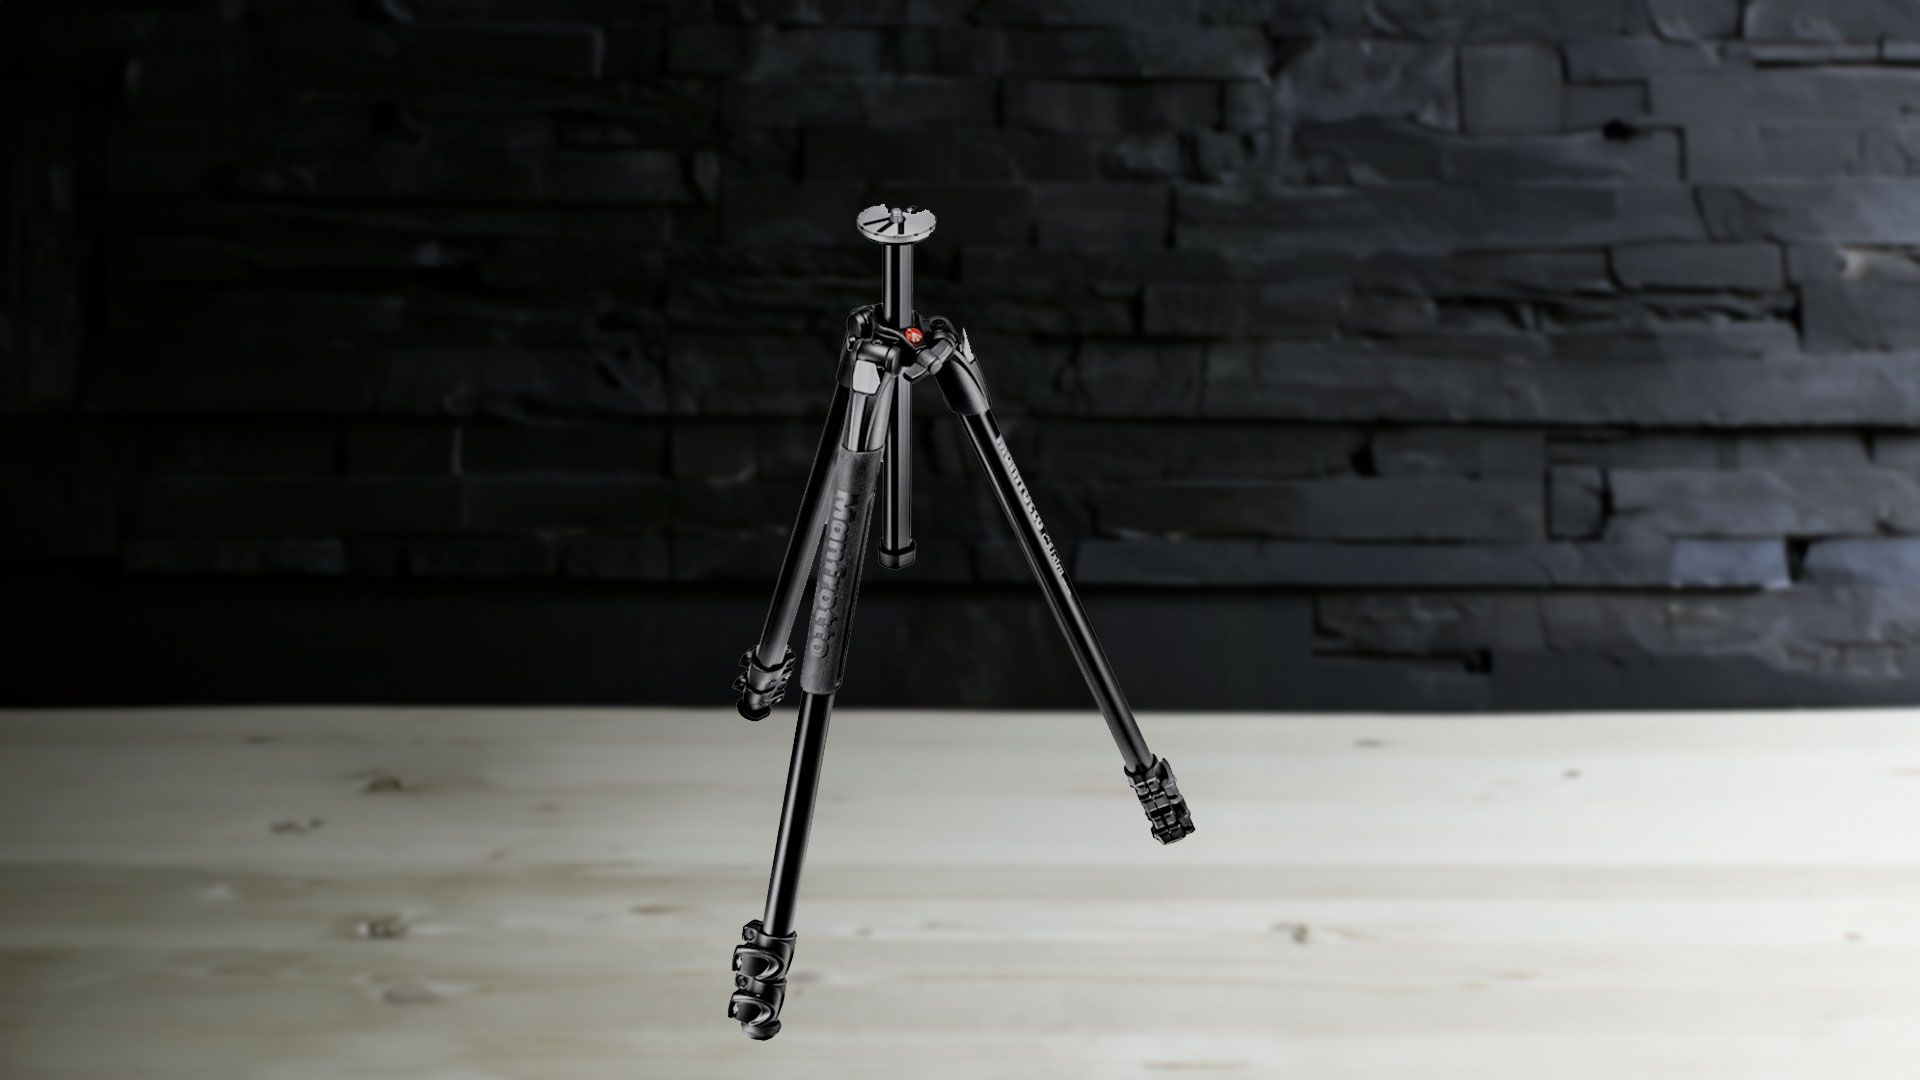 Manfrotto rent